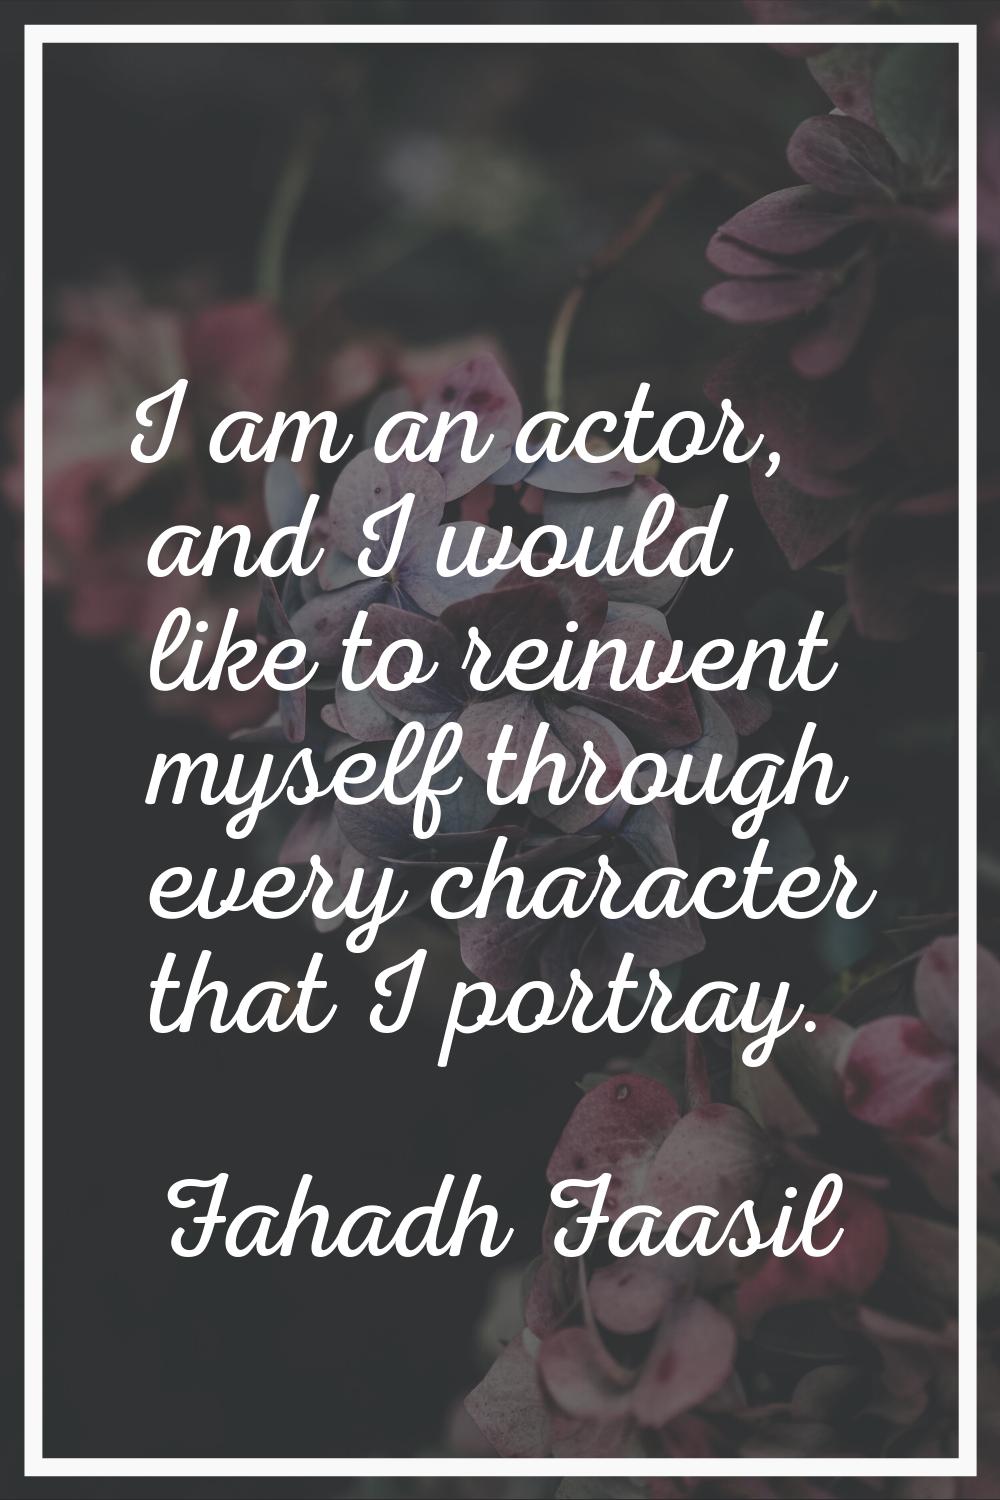 I am an actor, and I would like to reinvent myself through every character that I portray.